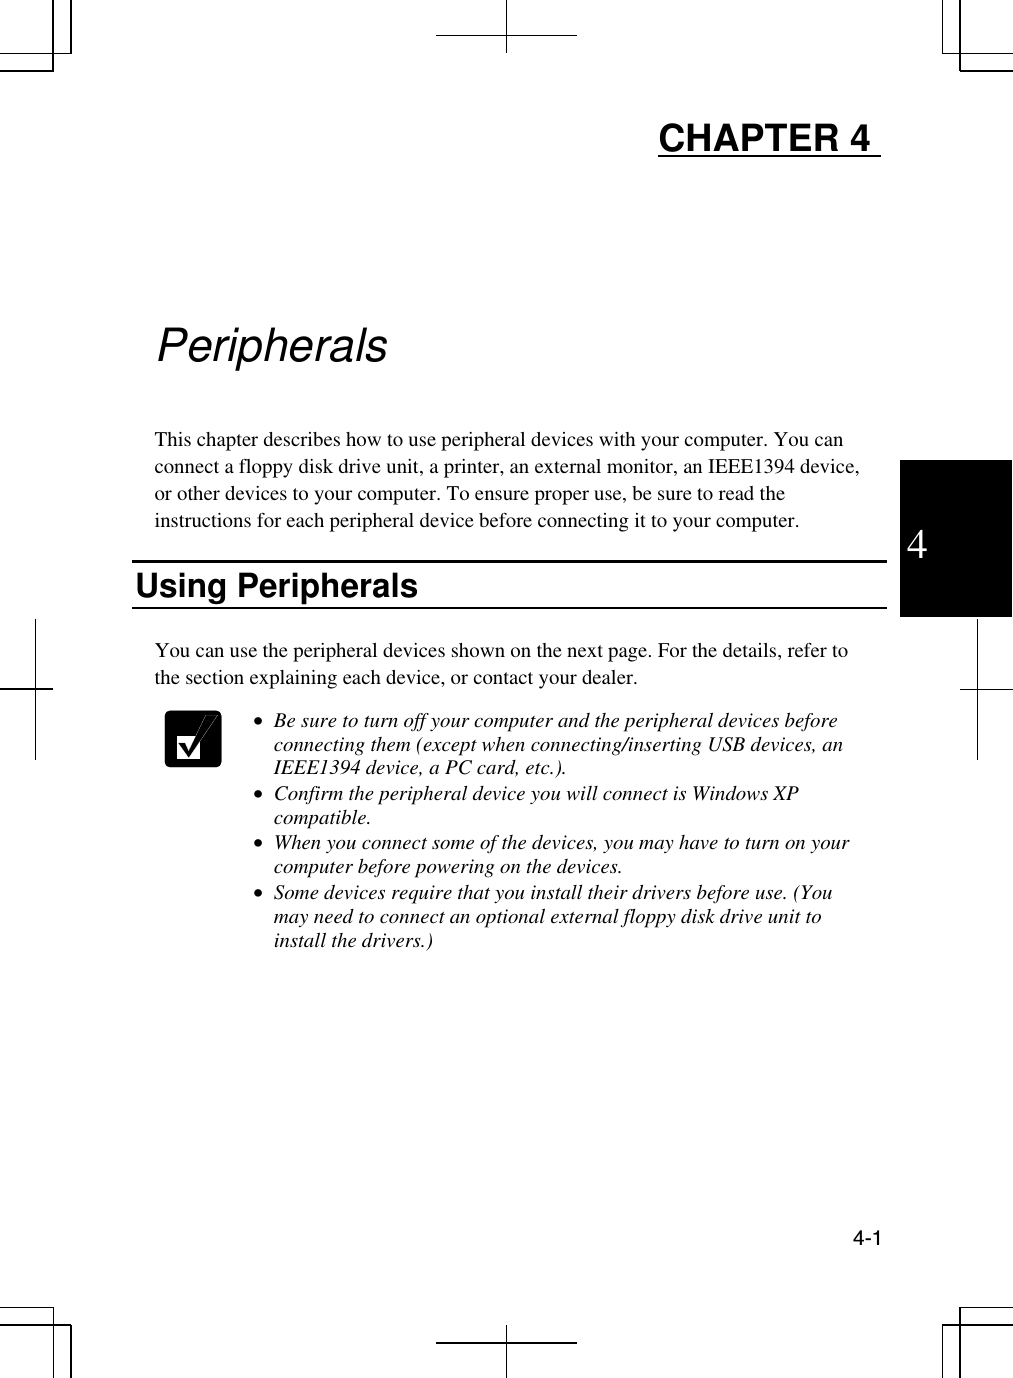  4-1  4 CHAPTER 4      Peripherals  This chapter describes how to use peripheral devices with your computer. You can connect a floppy disk drive unit, a printer, an external monitor, an IEEE1394 device, or other devices to your computer. To ensure proper use, be sure to read the instructions for each peripheral device before connecting it to your computer.   Using Peripherals   You can use the peripheral devices shown on the next page. For the details, refer to the section explaining each device, or contact your dealer.    •  Be sure to turn off your computer and the peripheral devices before connecting them (except when connecting/inserting USB devices, an IEEE1394 device, a PC card, etc.).  •  Confirm the peripheral device you will connect is Windows XP compatible. •  When you connect some of the devices, you may have to turn on your computer before powering on the devices.  •  Some devices require that you install their drivers before use. (You may need to connect an optional external floppy disk drive unit to install the drivers.)     